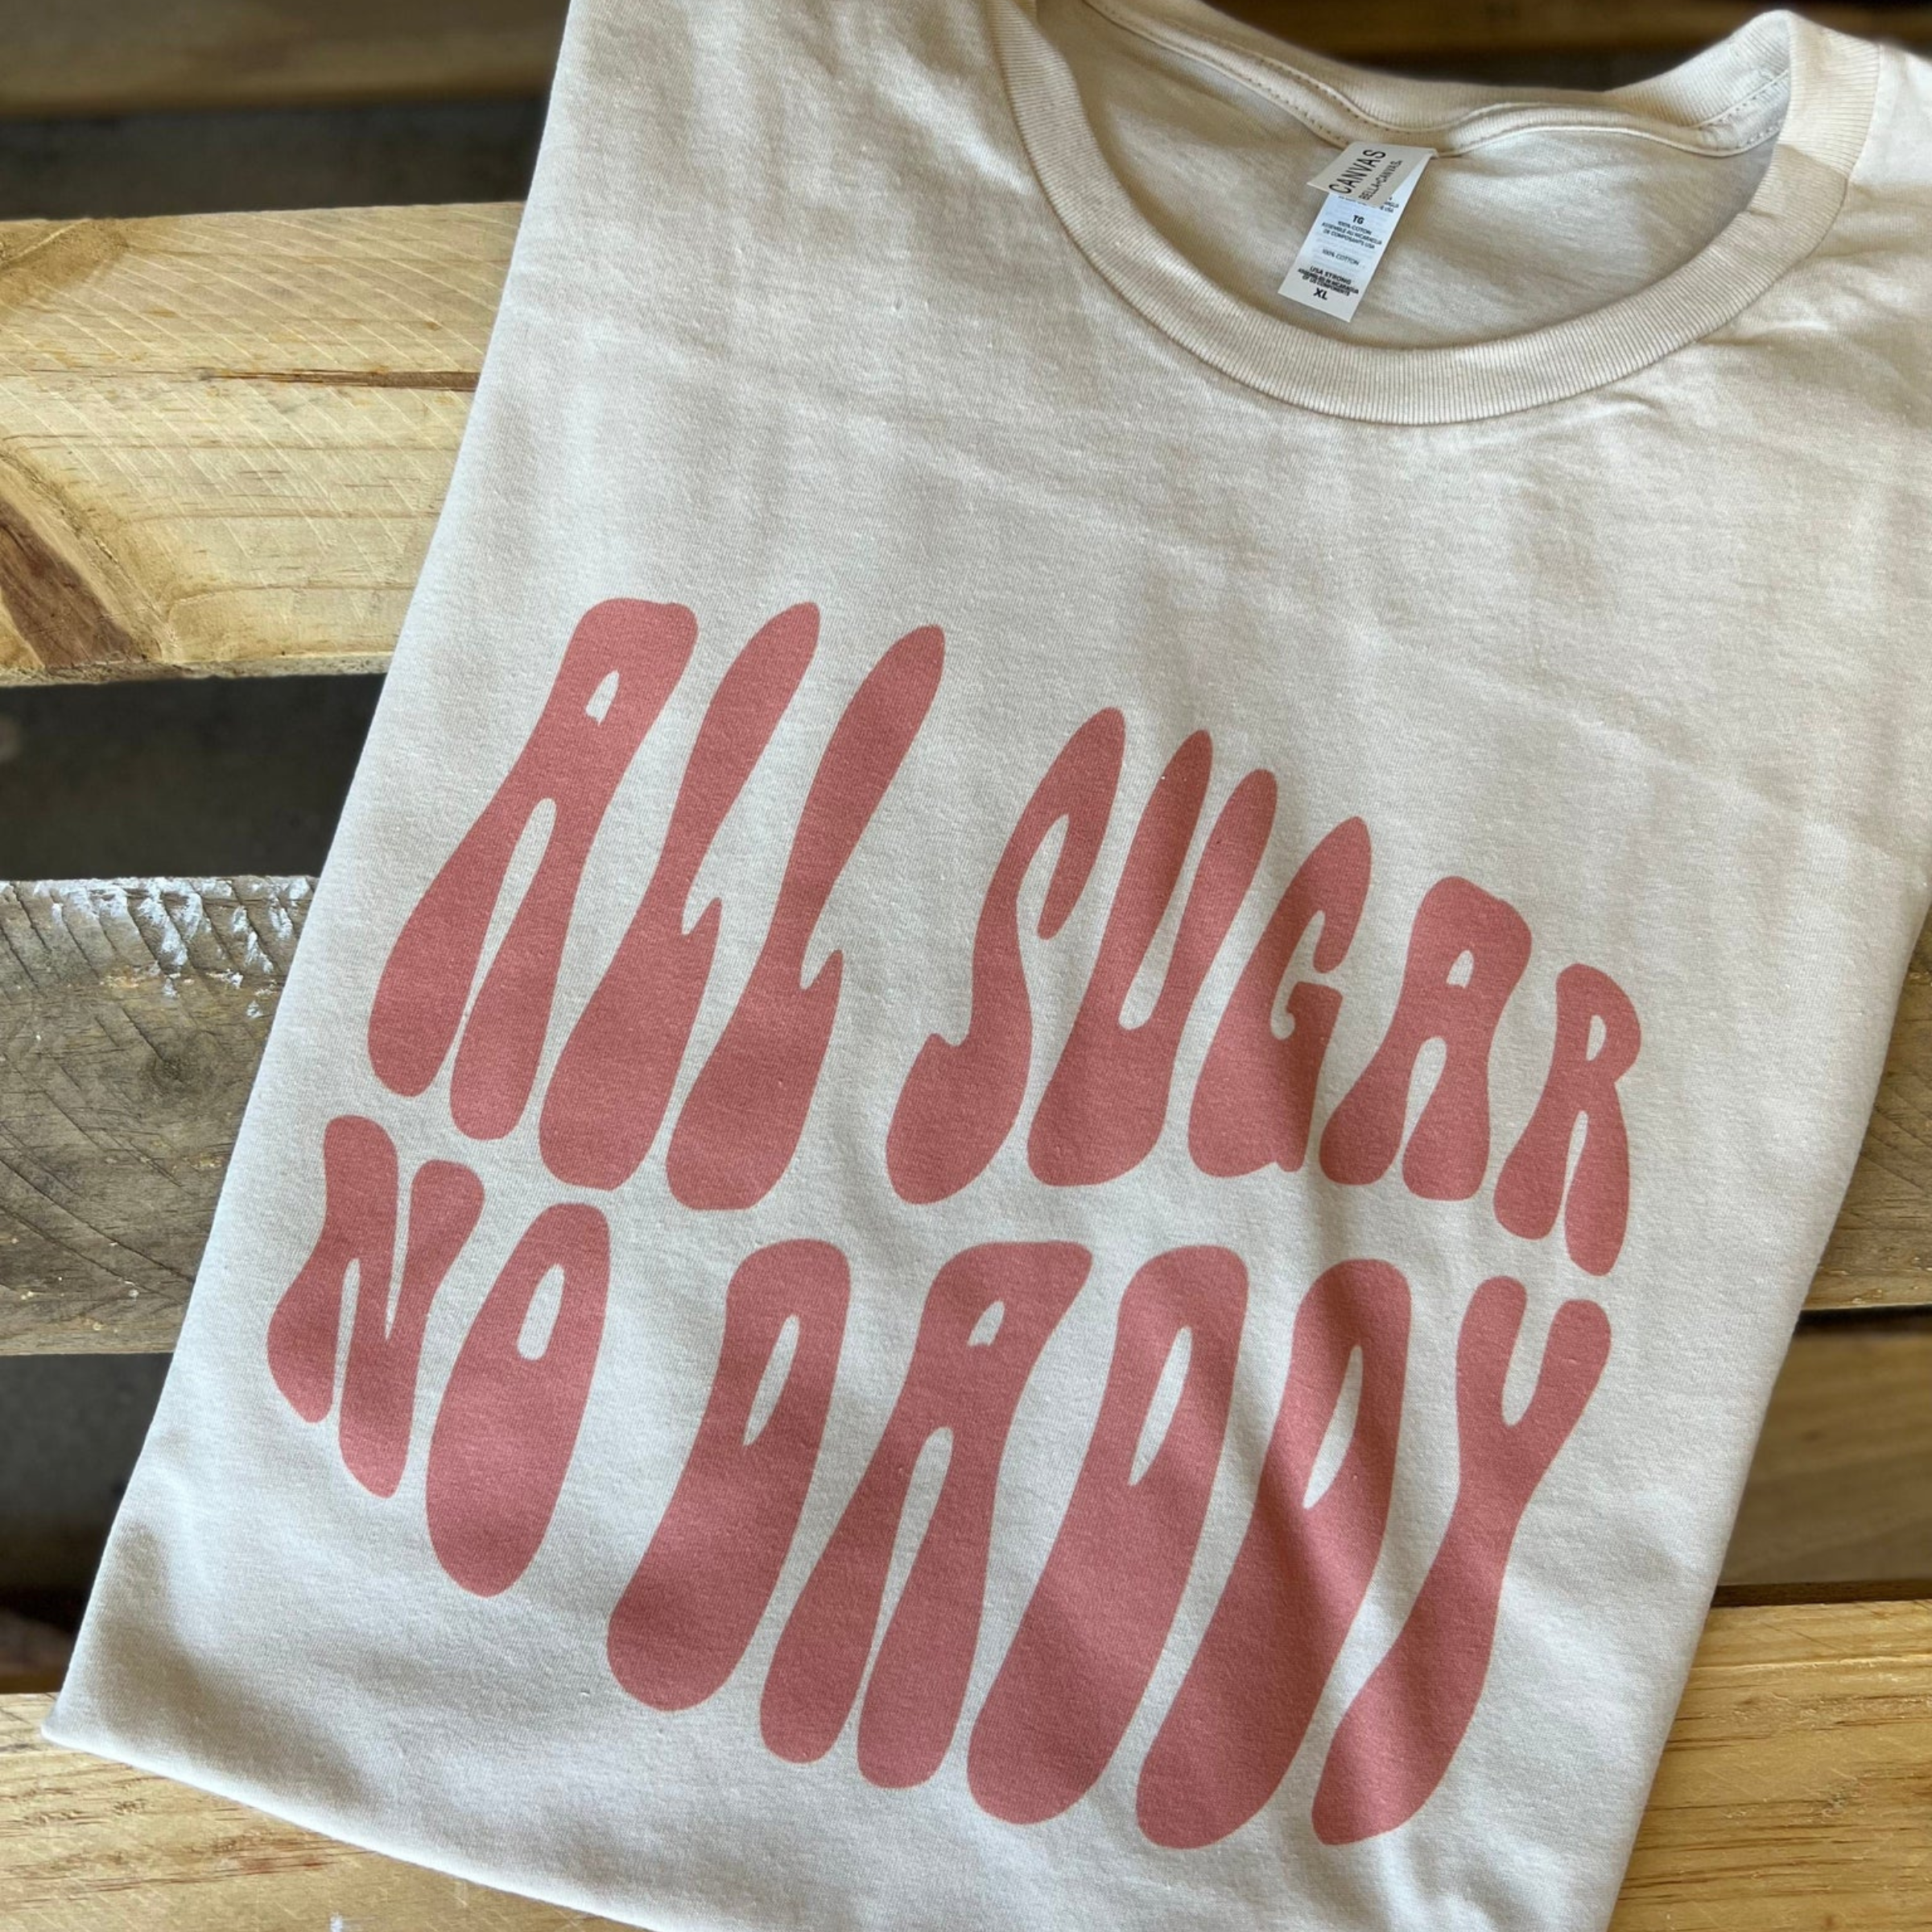 This cream Bella + Canvas graphic tee includes a crew neckline, short sleeves, and cute hand drawn design that says "ALL SUGAR NO DADDY" in a pink bubble type of font. This tee is shown in this photo as a folded flat lay.